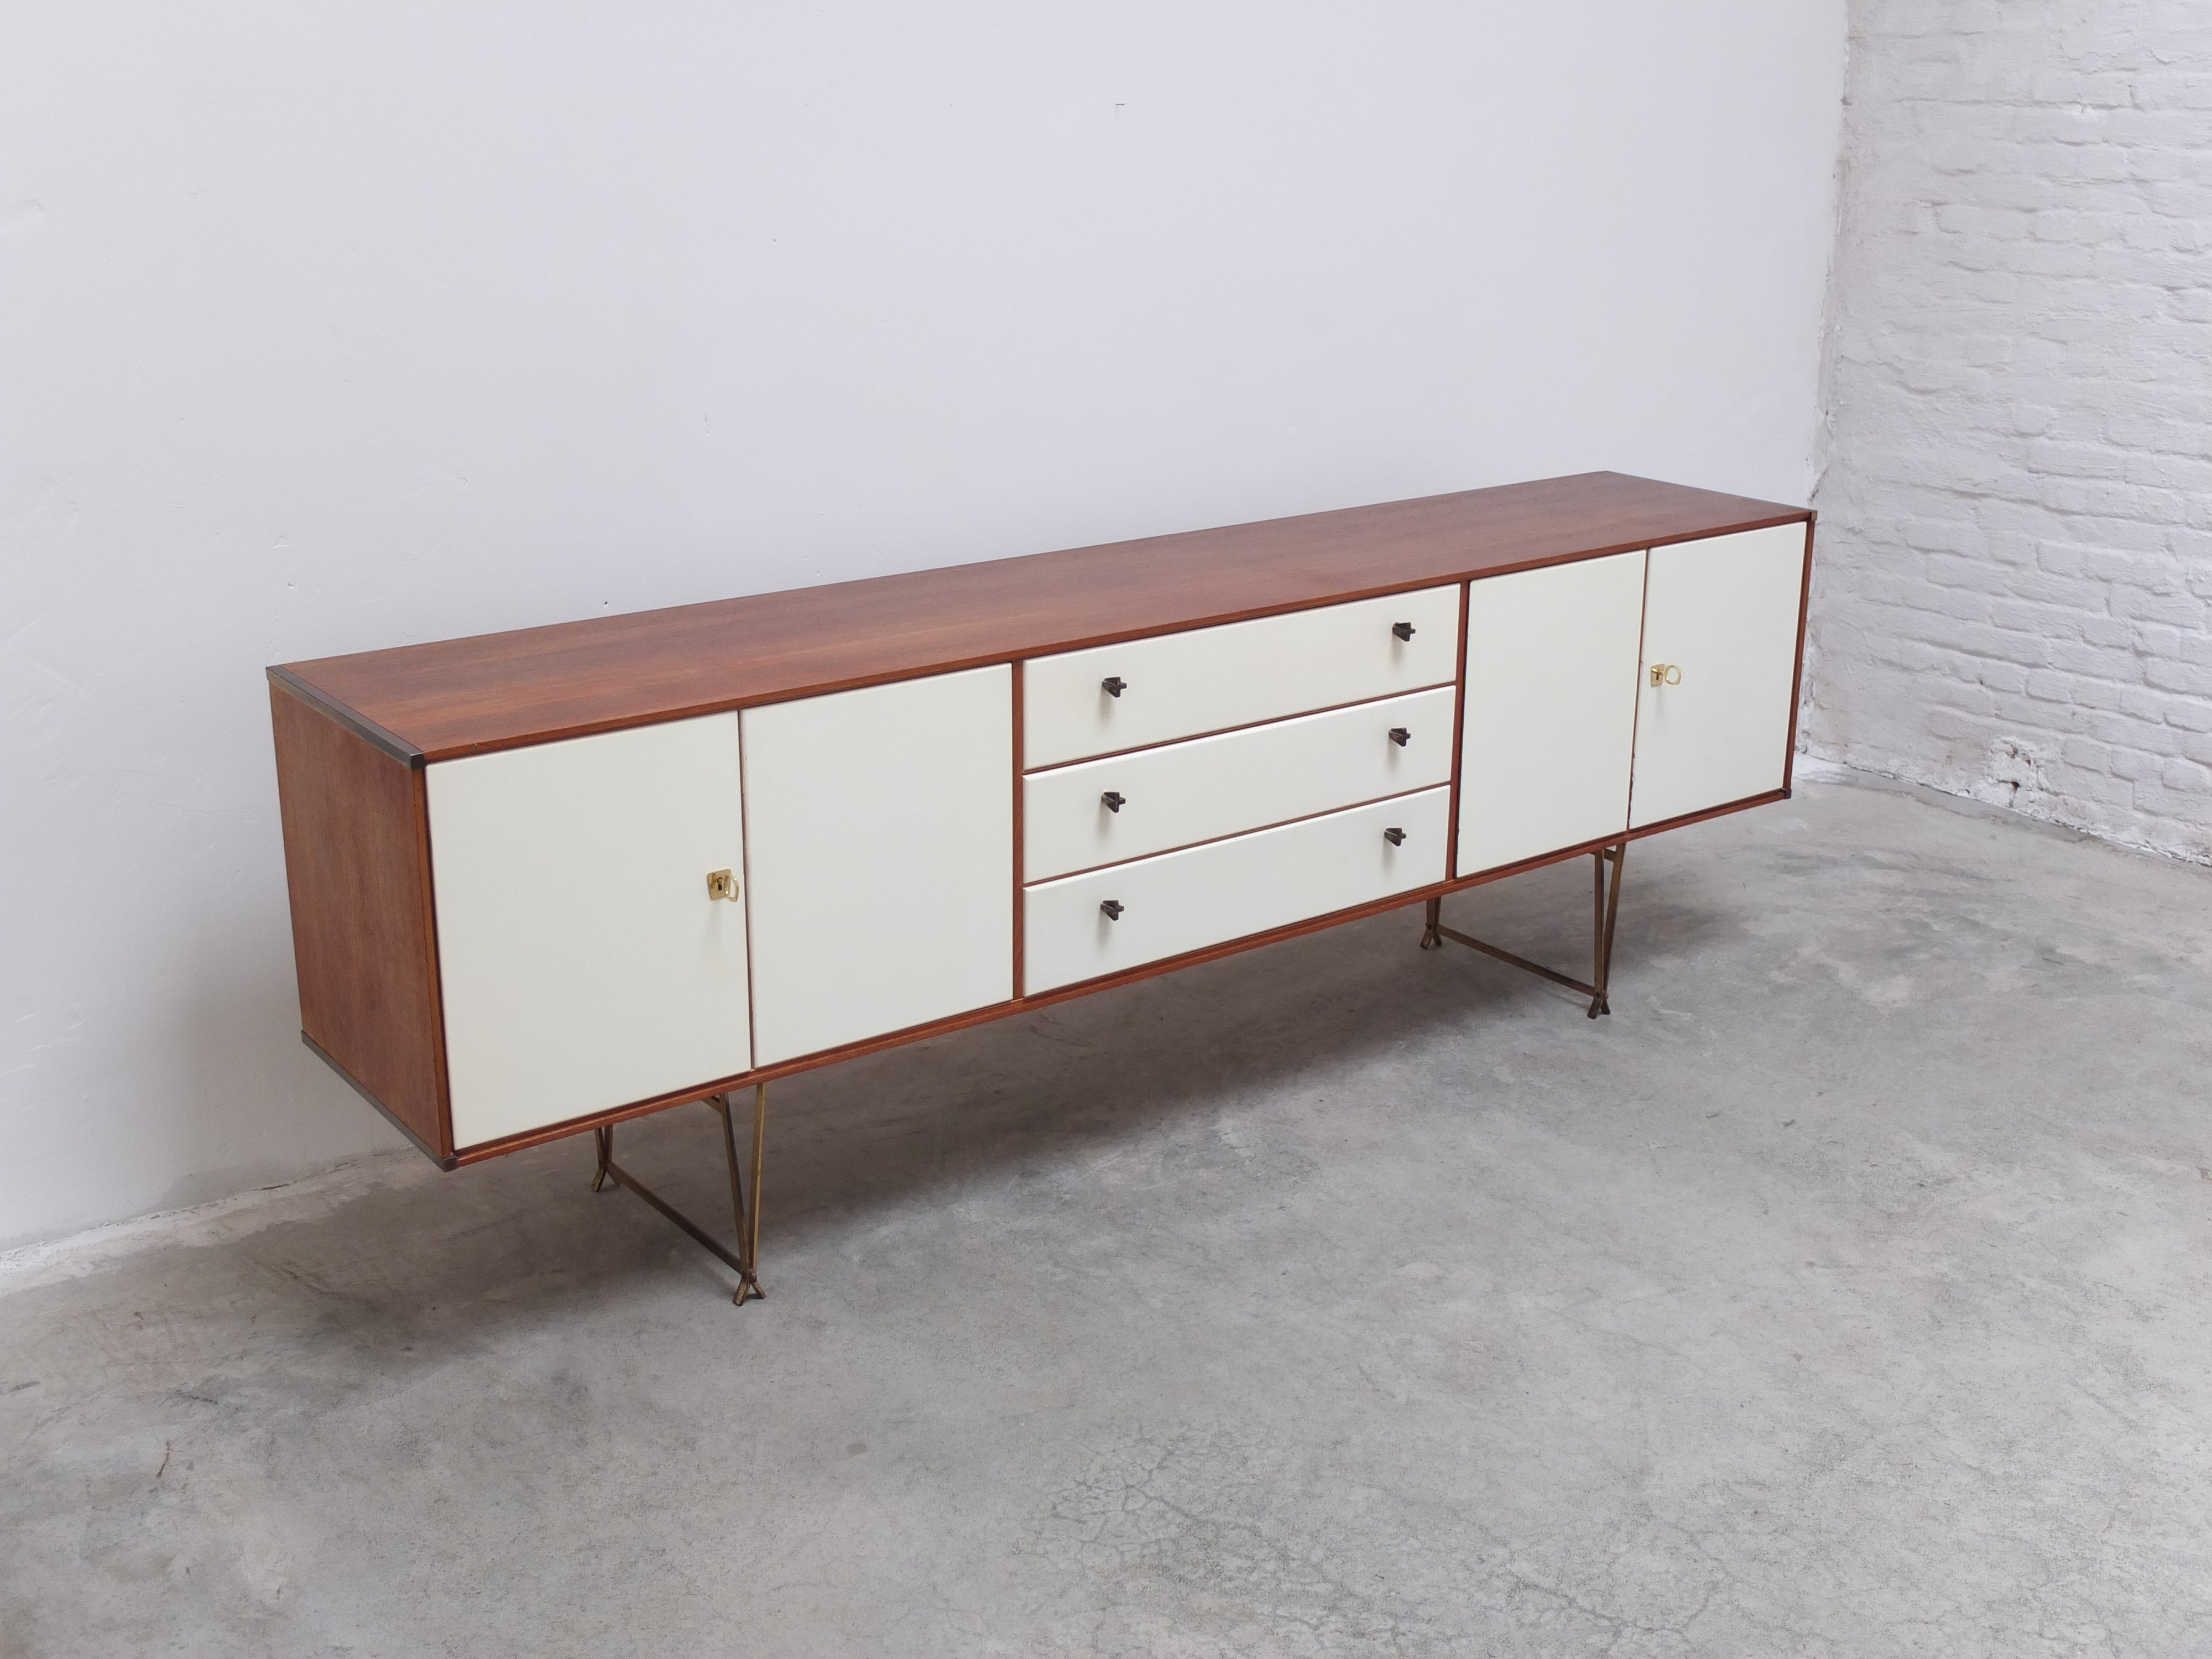 Super refined and elegant sideboard designed by William Watting for Fristho in the 1950s. The combination of teak with brass details all over and the cream colored doors make this a very unique and decorative piece. The slim tapered brass legs that